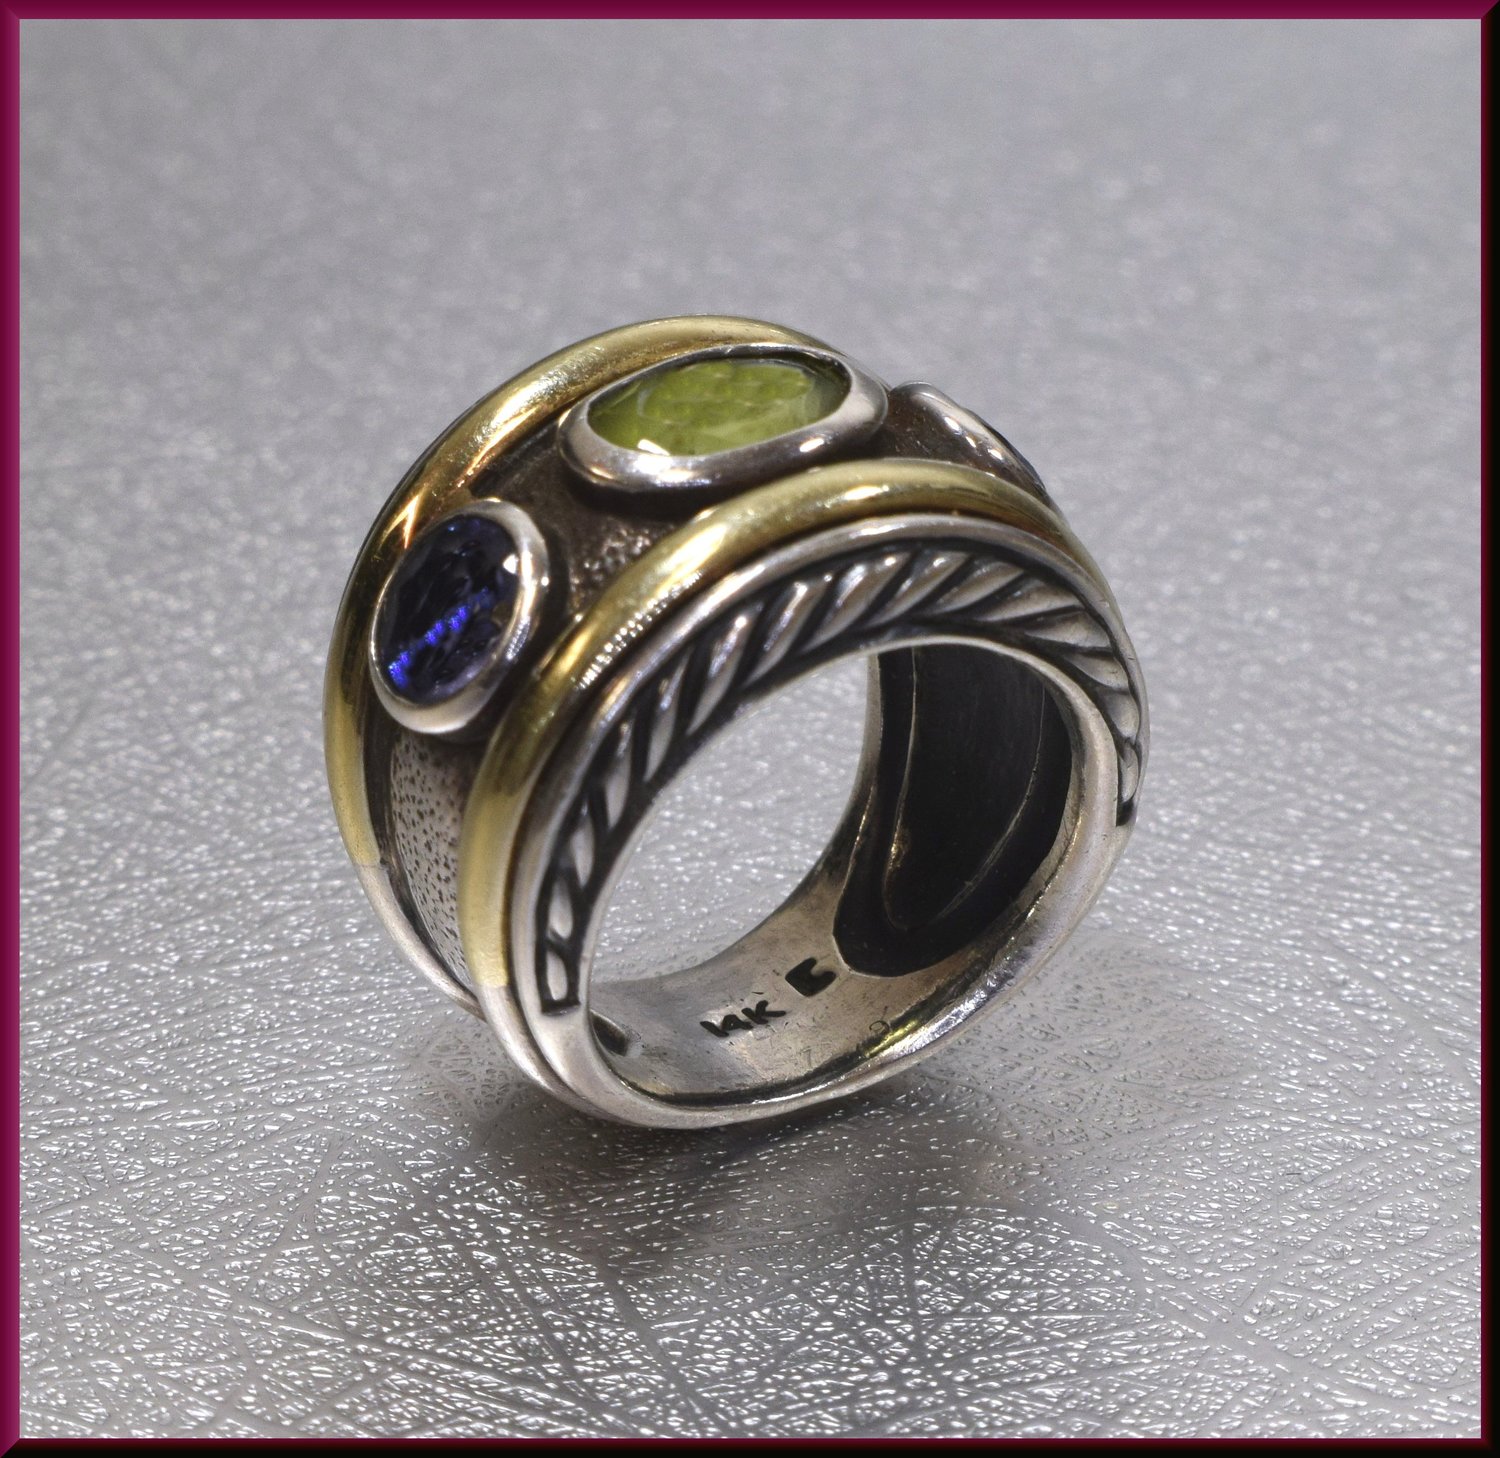 Renaissance Wedding Ring in Sterling Silver